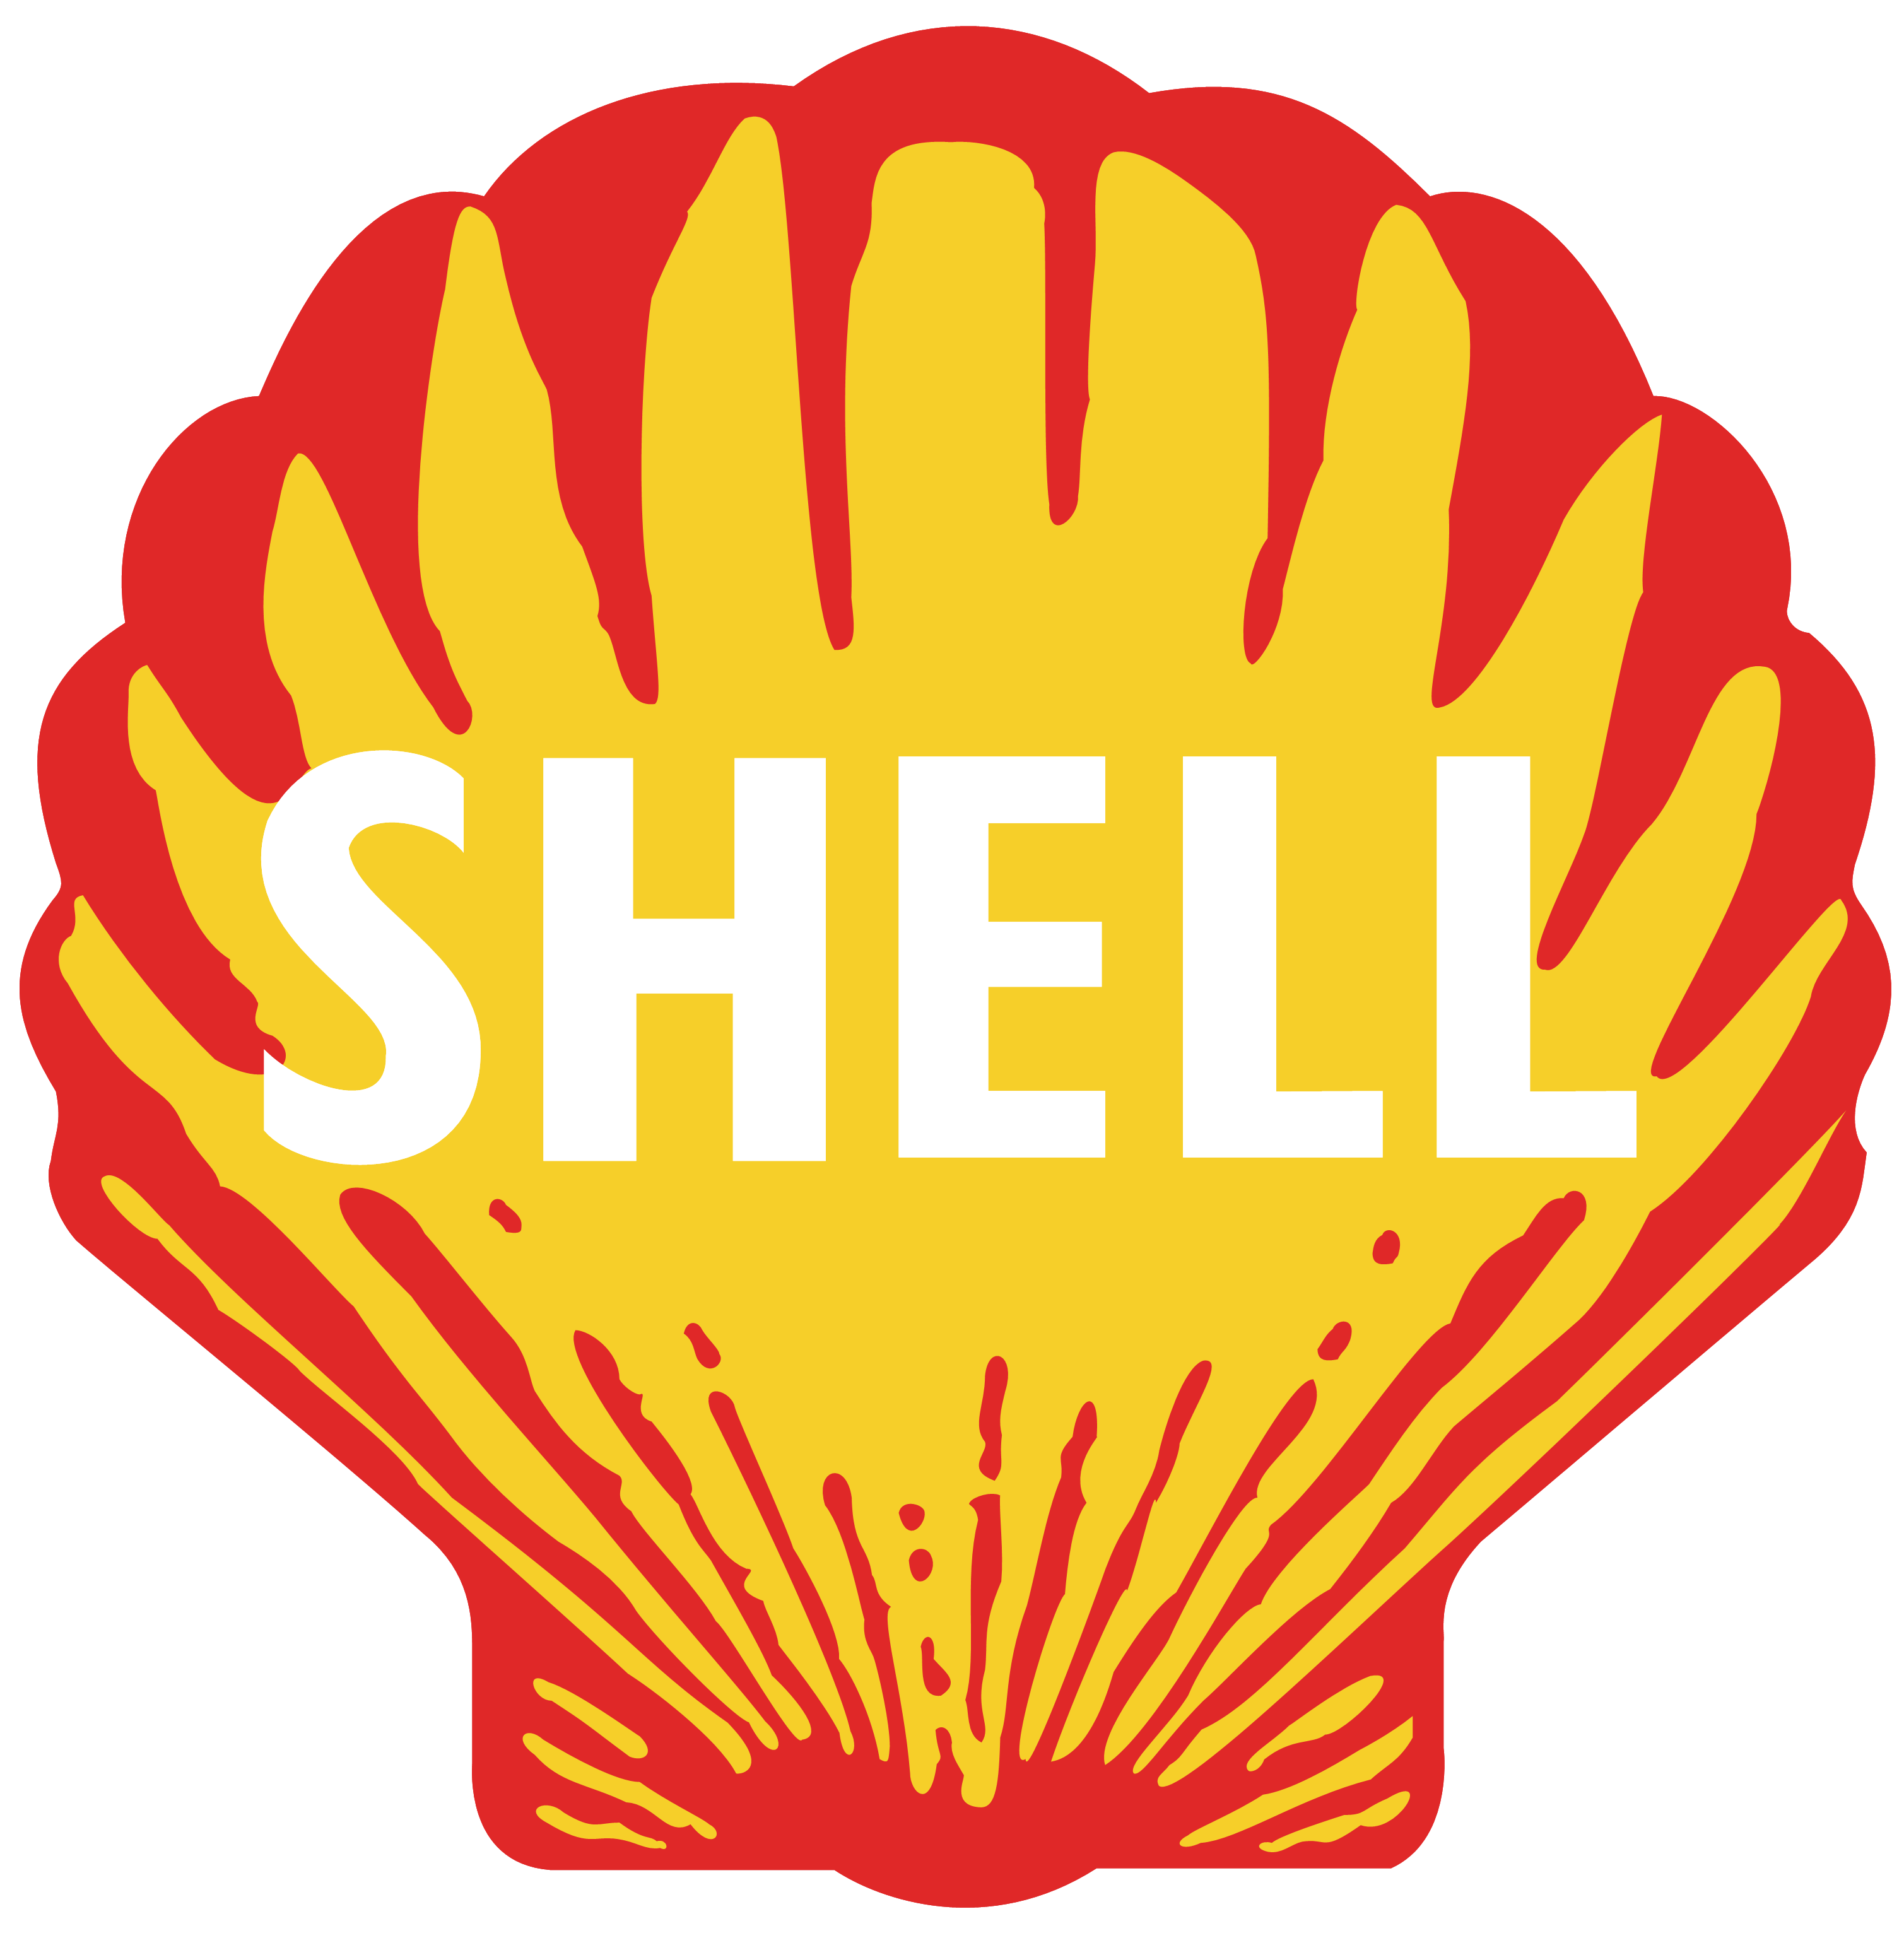 Red and Yellow Seashell Logo - Shell: The evolution of a logo